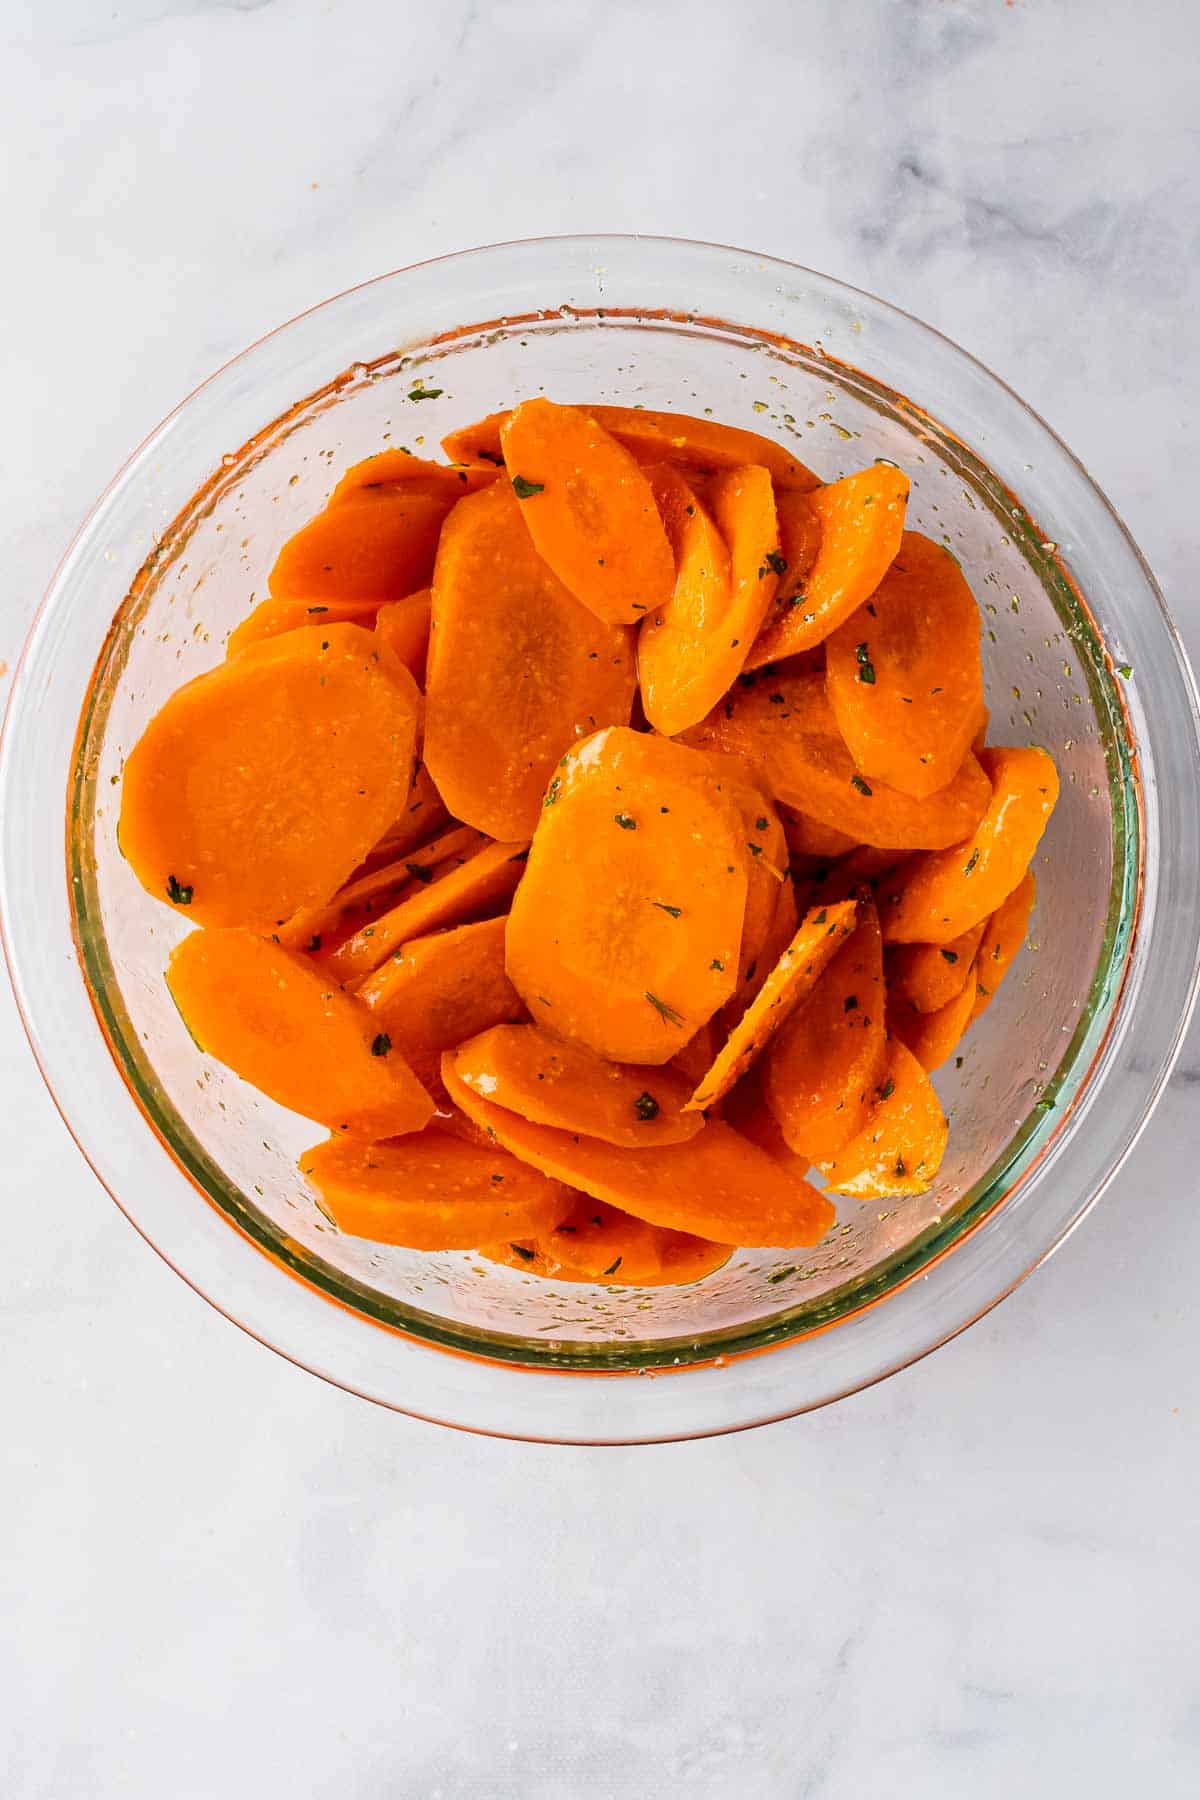 Carrot slices in a glass bowl tossed with oil and spices